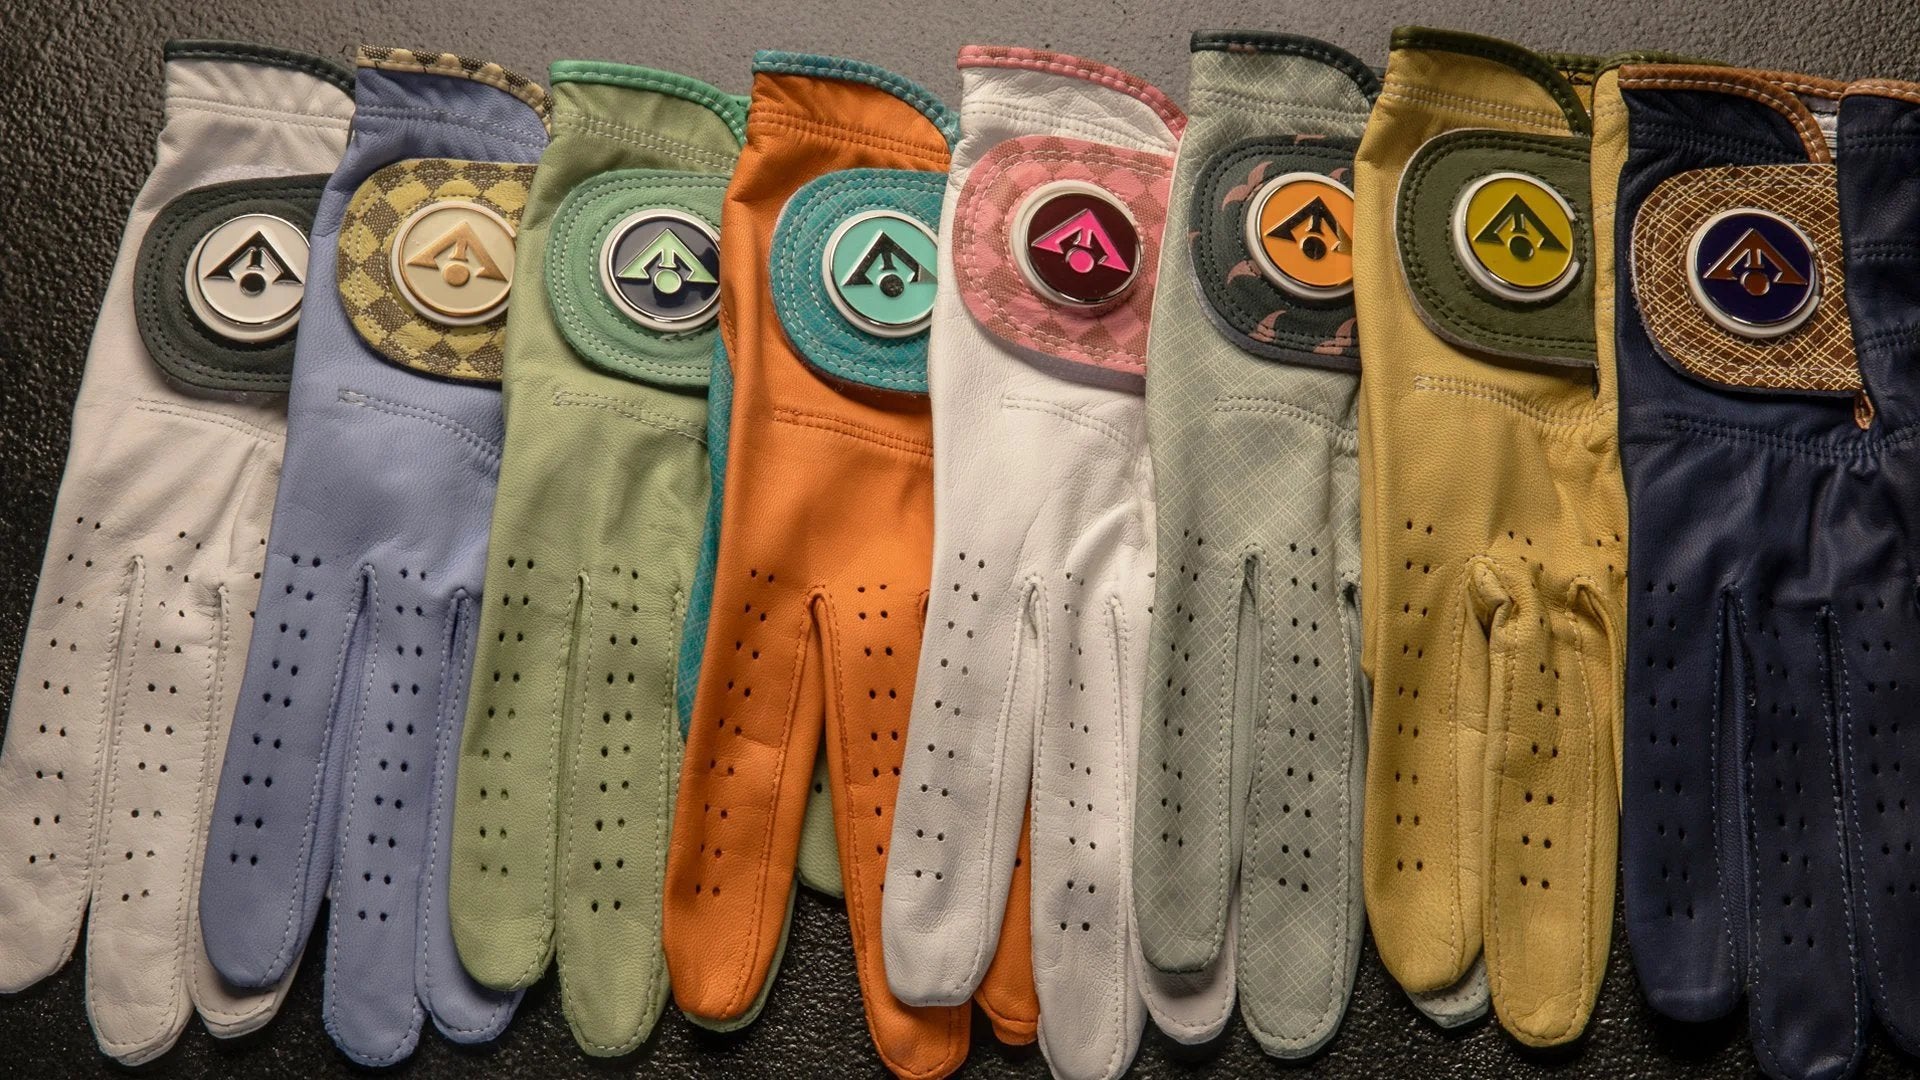 Designer golf gloves laid out in various colors show casing the vibrant hues of our designer golf gloves with markers.   with magnetic ball marker, glove in orange and blue.